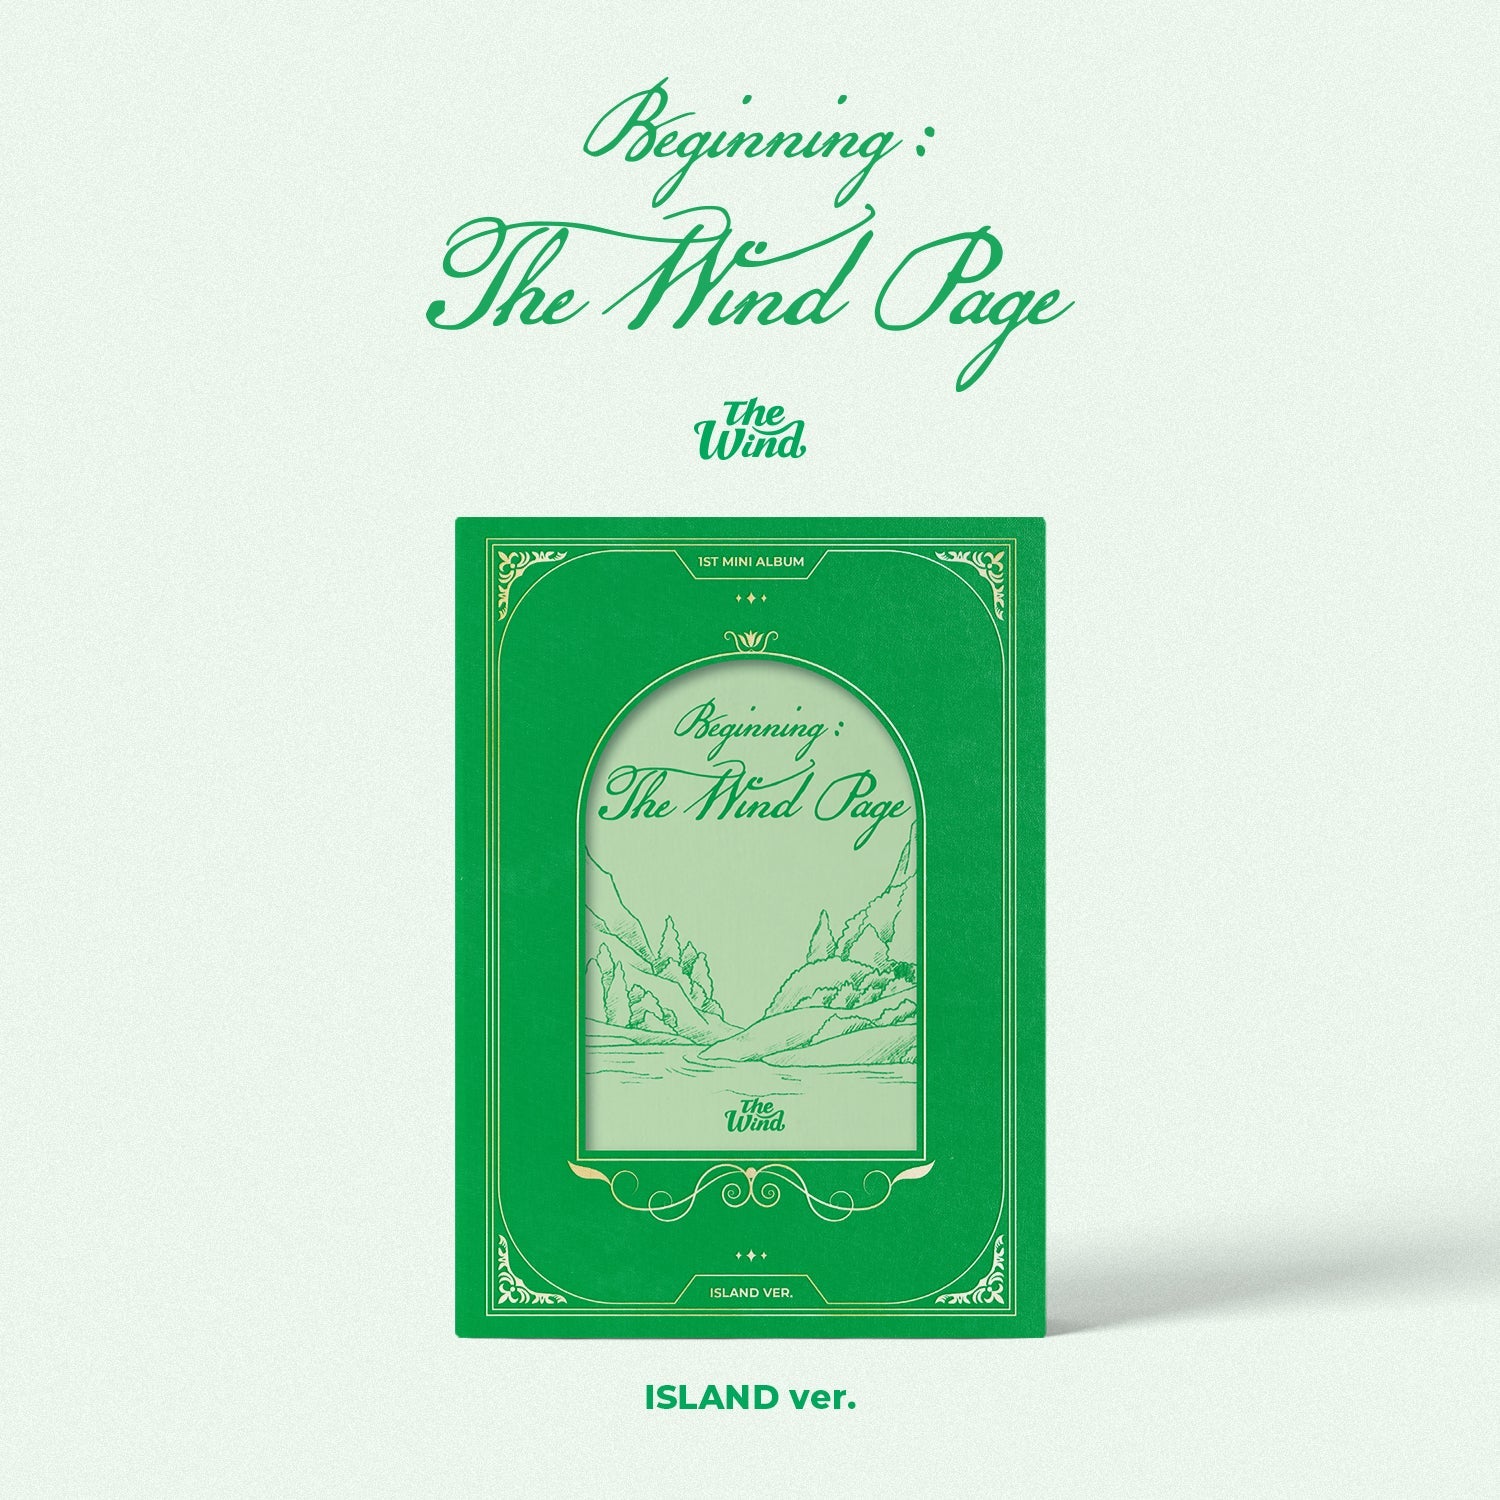 THE WIND 1ST MINI ALBUM 'BEGINNING : THE WIND PAGE' ISLAND VERSION COVER